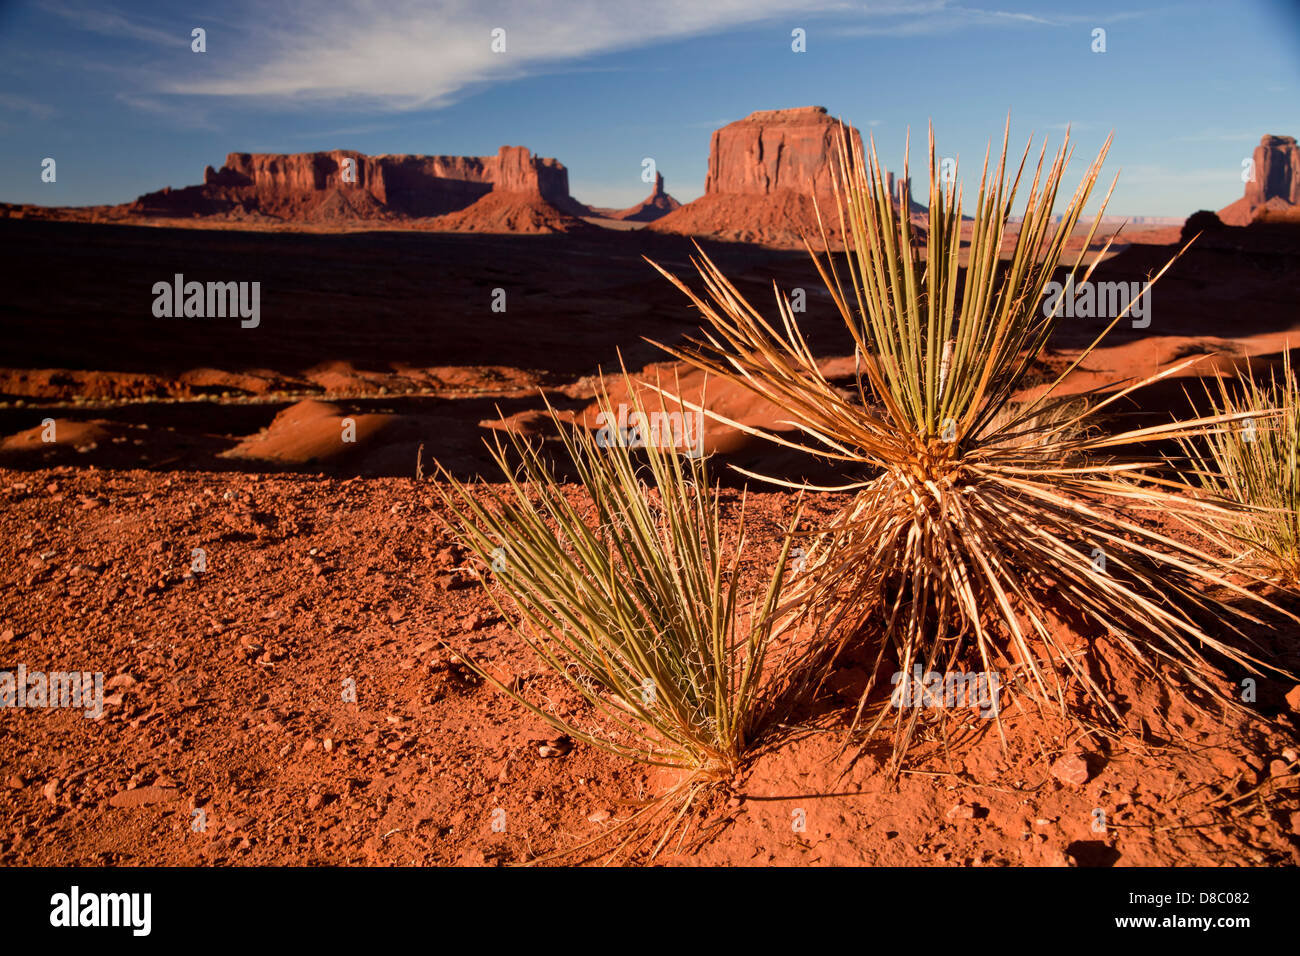 yucca plant and sandstone buttes at Monument Valley Navajo Tribal Park, United States of America, USA Stock Photo